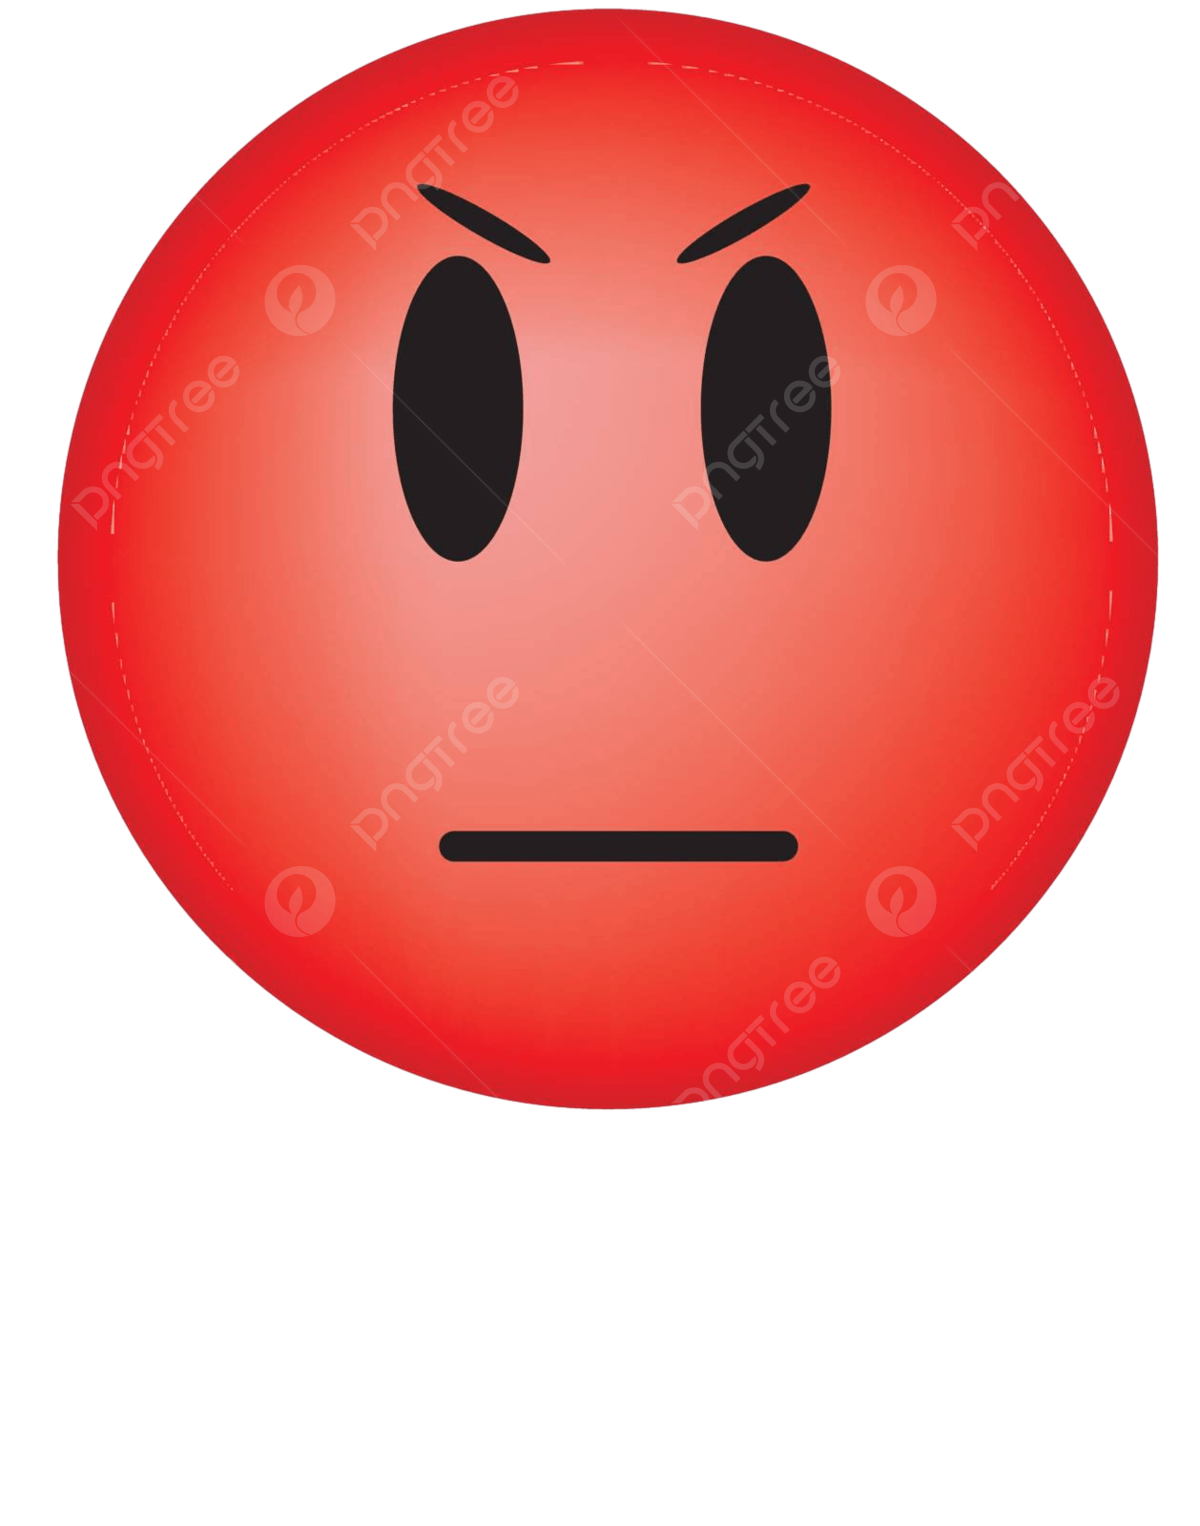 Angry Face PNG Image